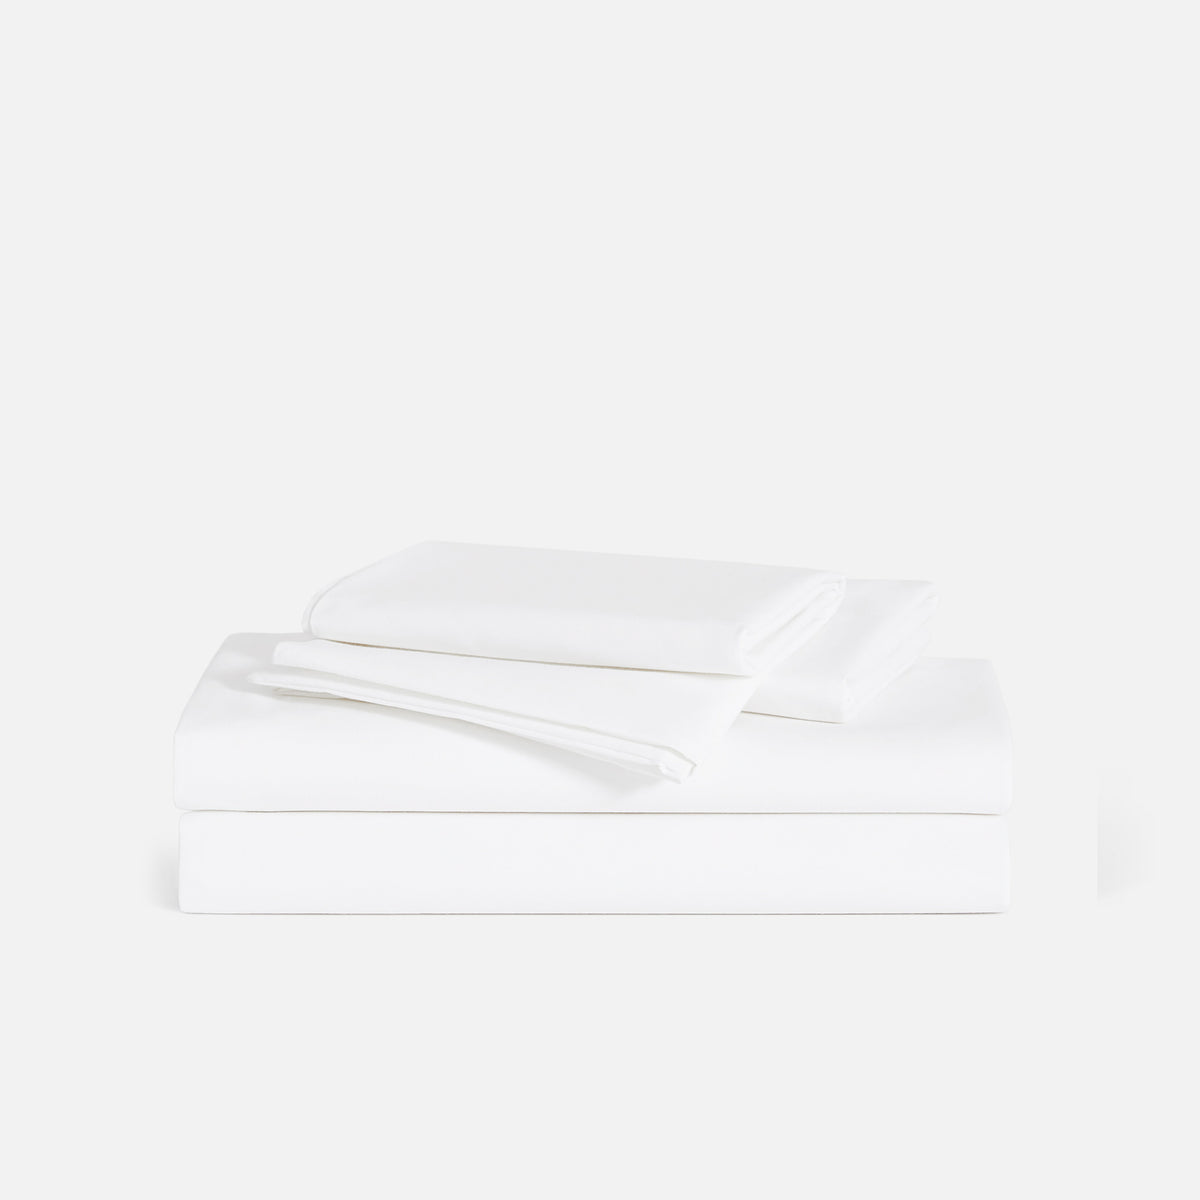 https://cdn.shopify.com/s/files/1/0951/7126/products/luxe_solid-white_core-sheet-set_silo_1200x.jpg?v=1591102755